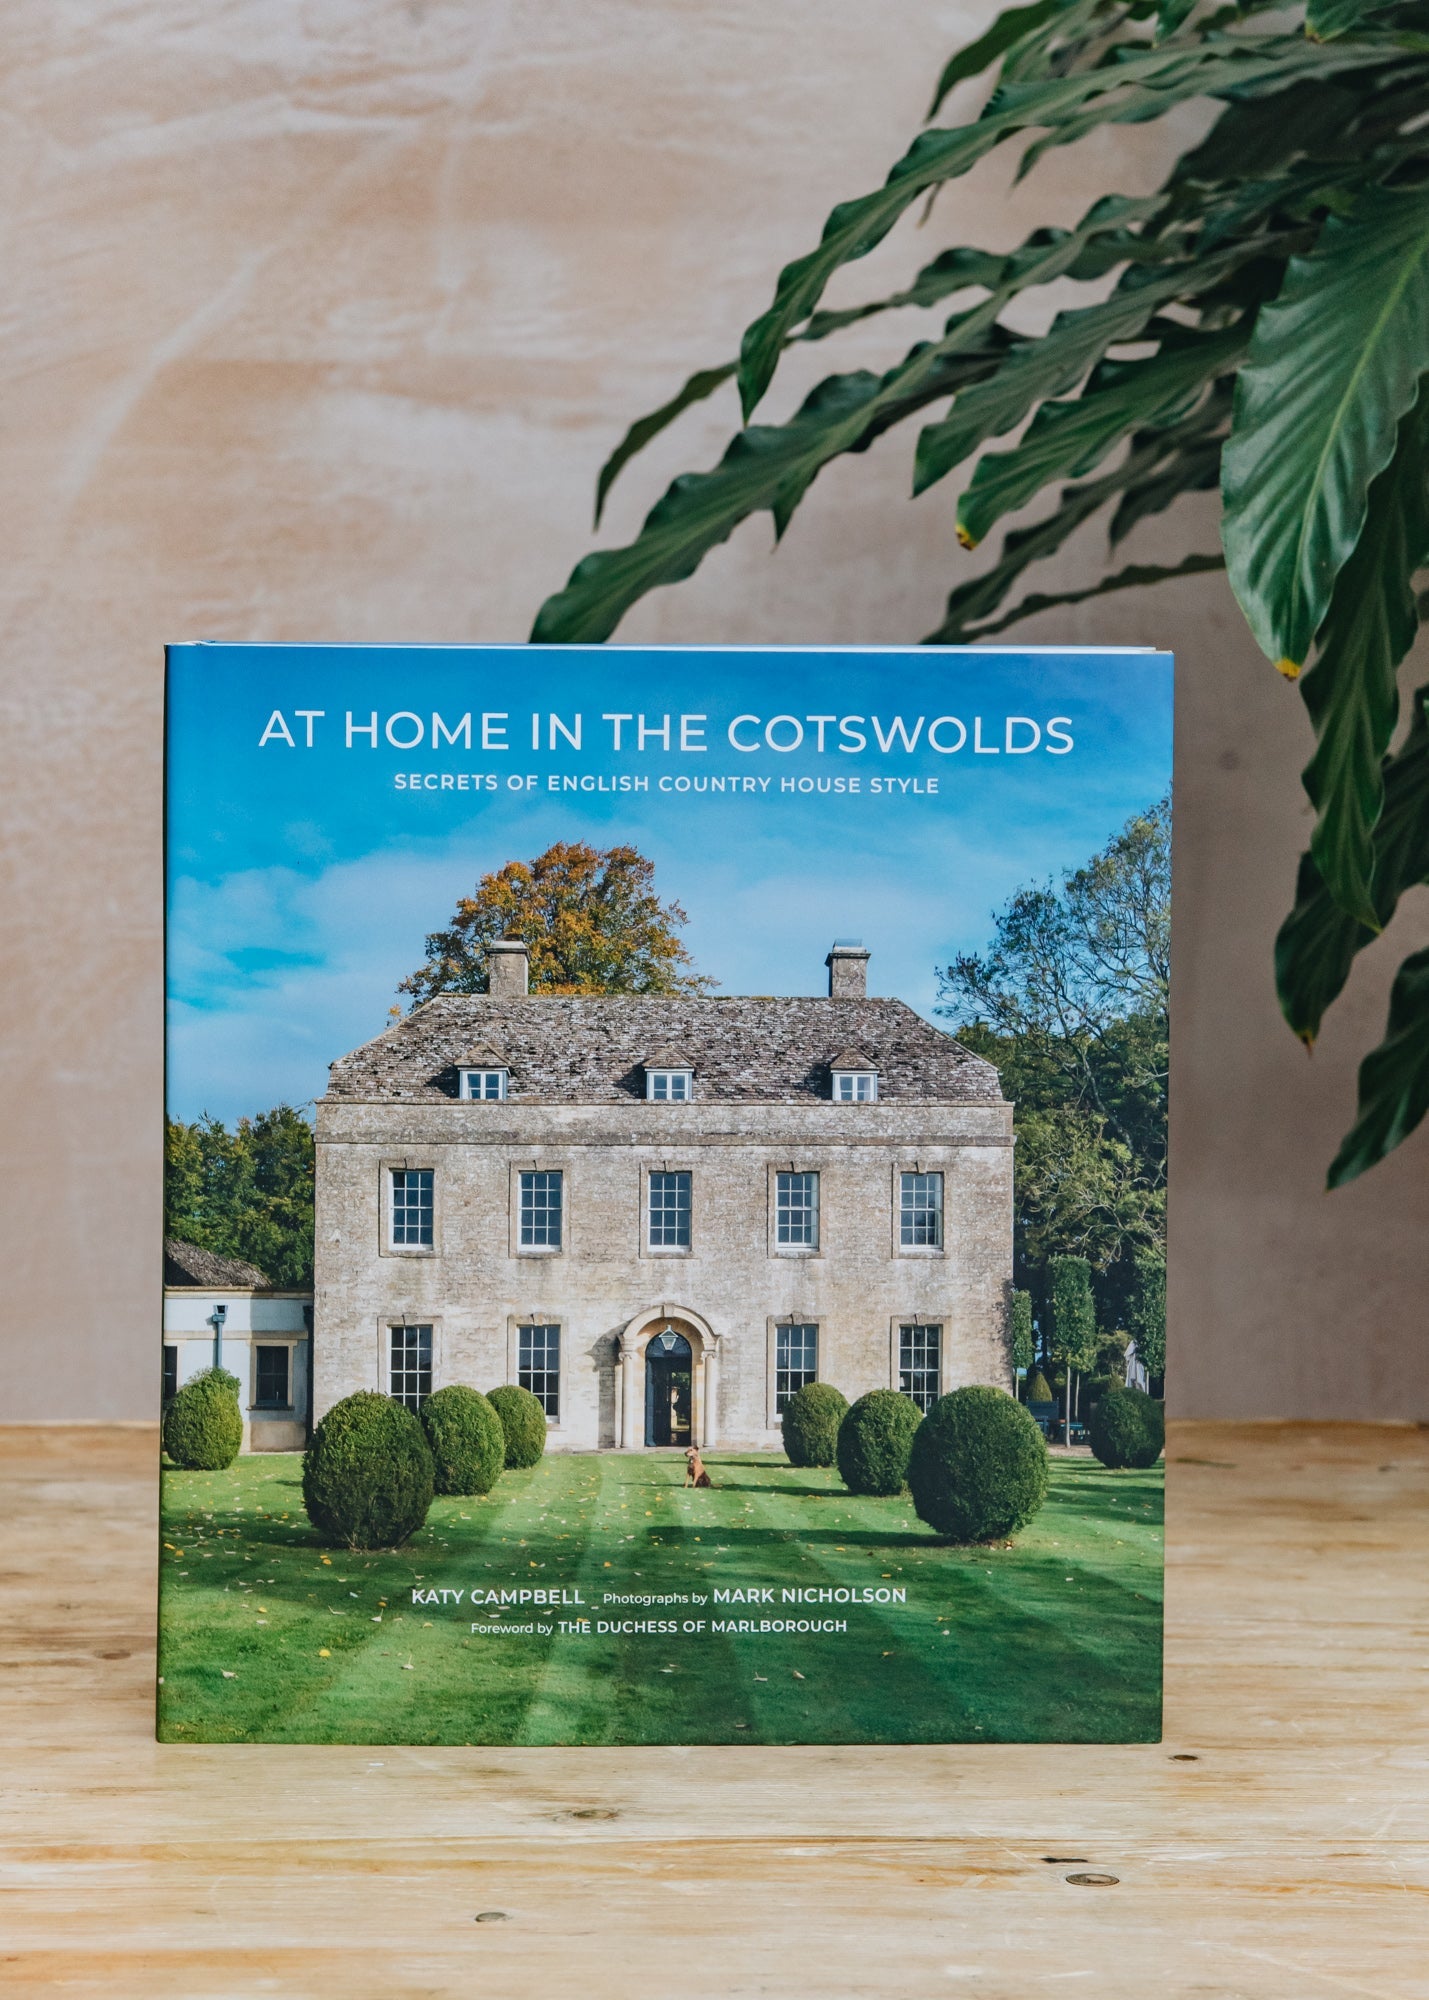 At Home in the Cotswolds